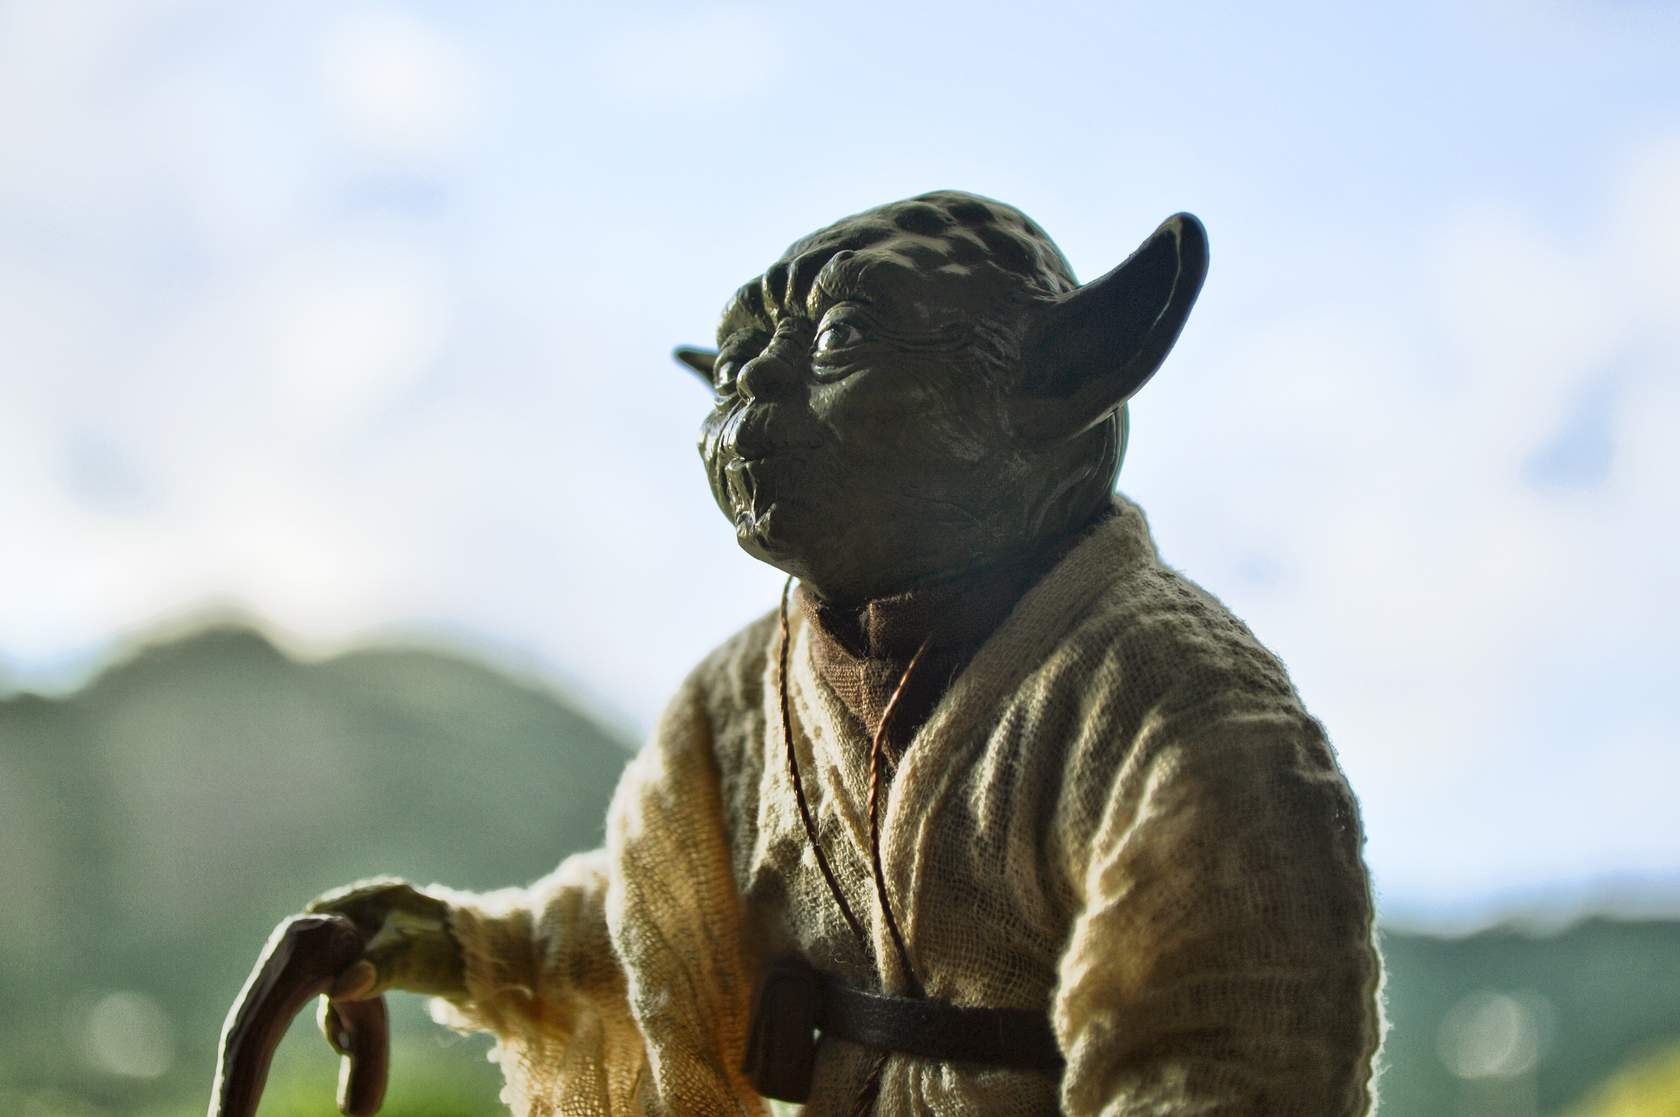 A Yoda figure is standing in front of a tree.